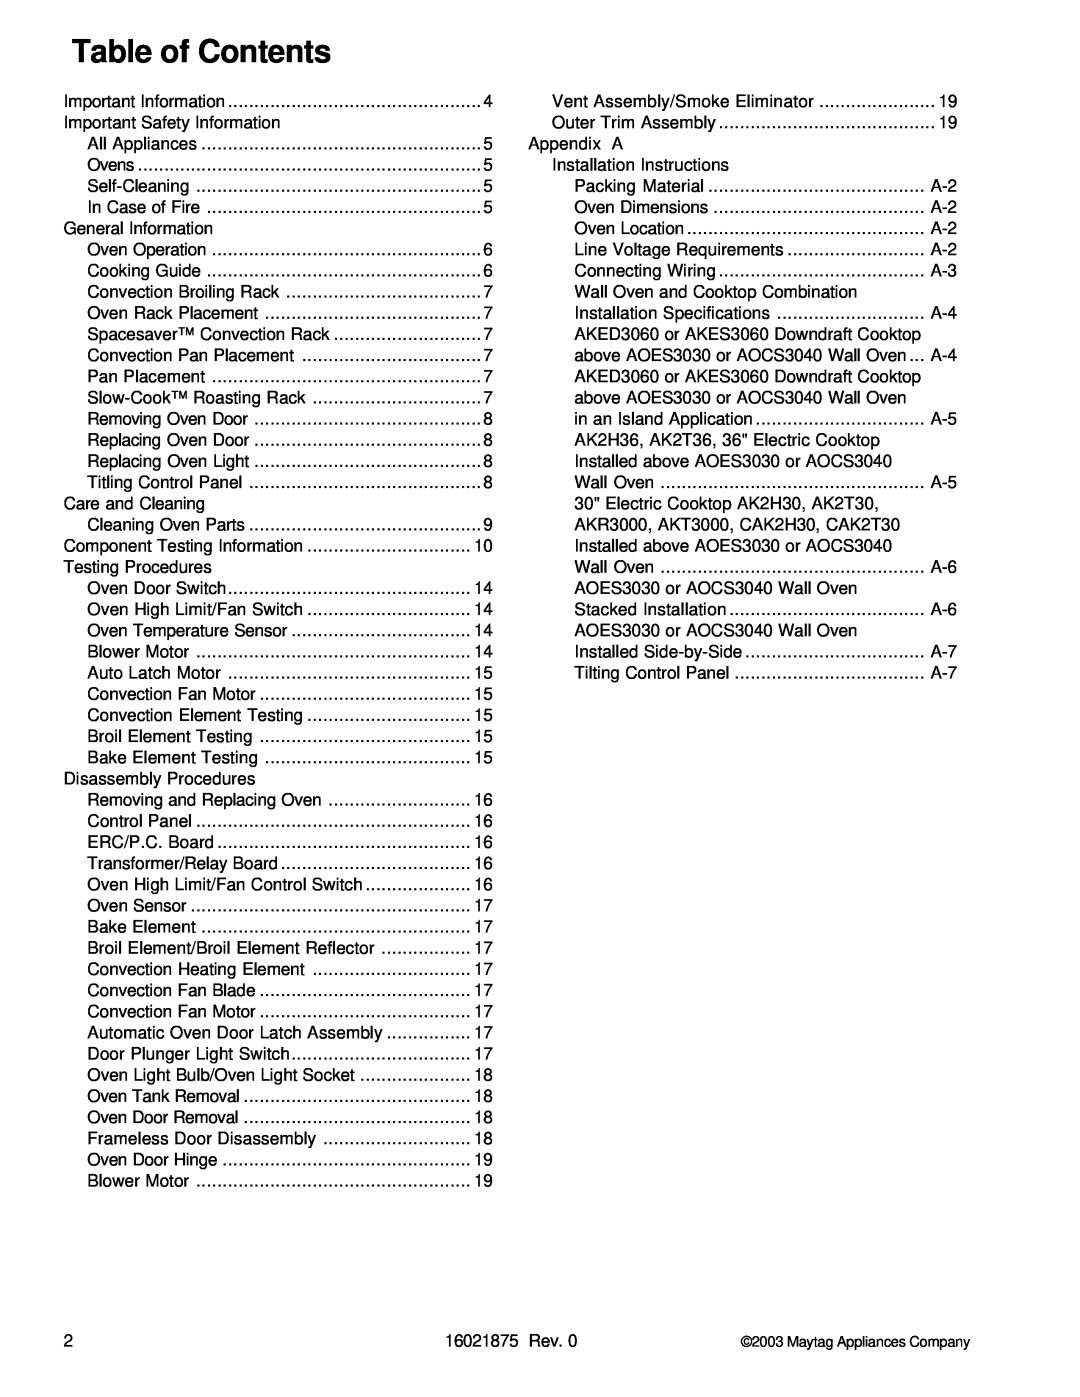 Maytag AOES3030, AOCS3040 manual Table of Contents 